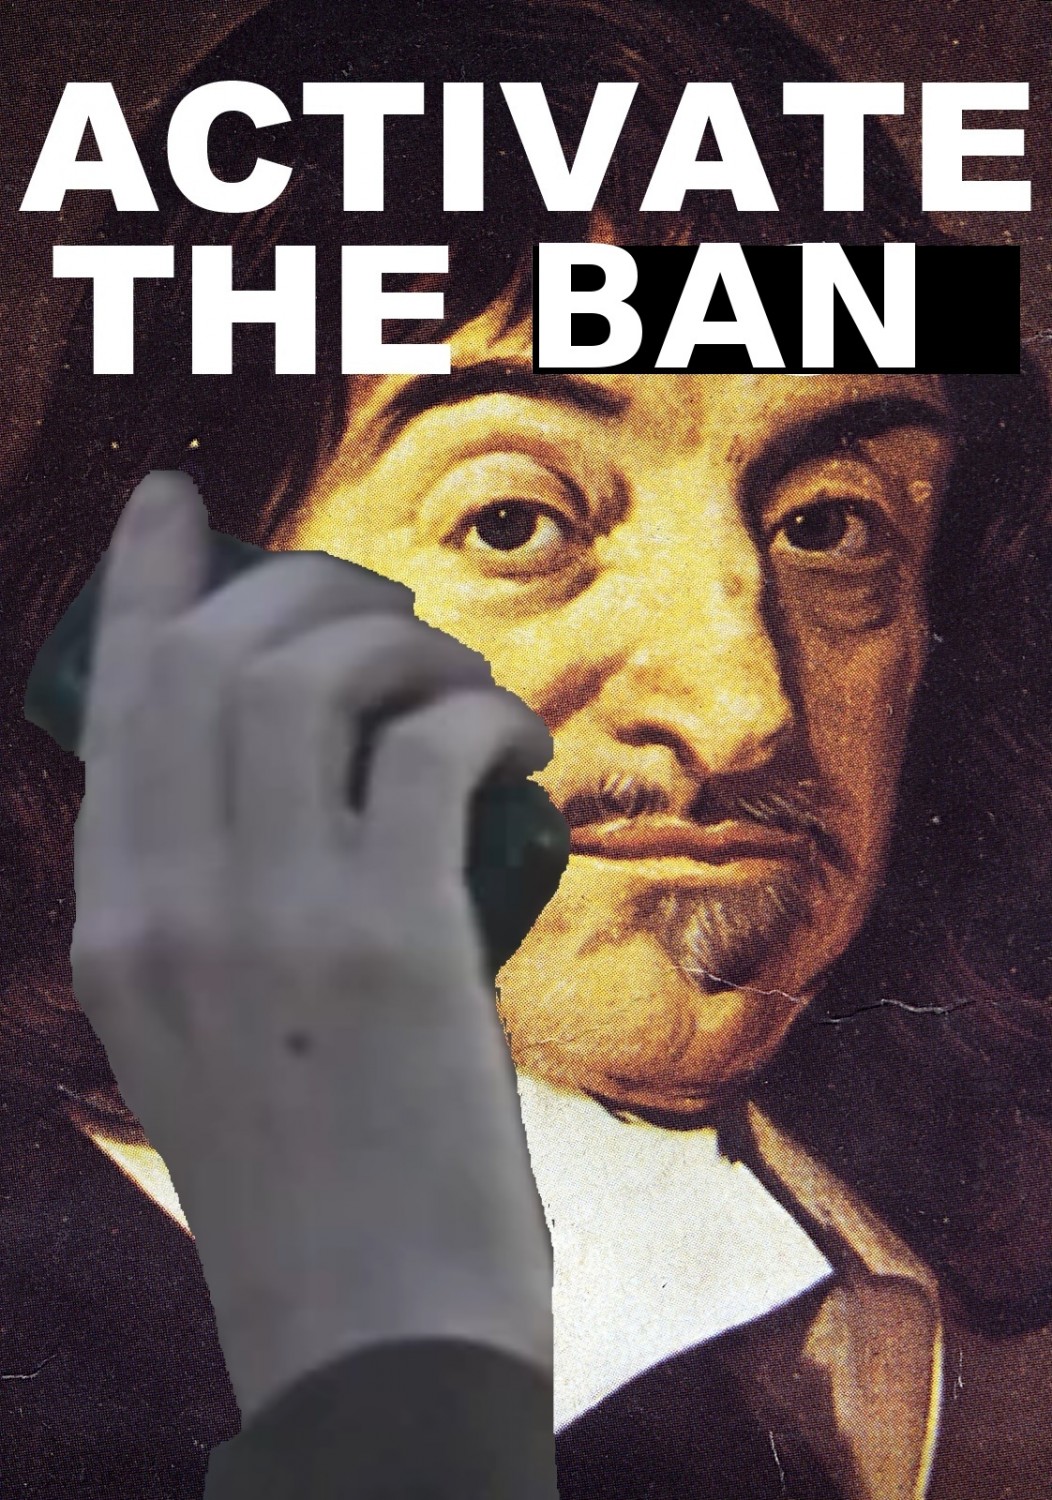 Activate the ban